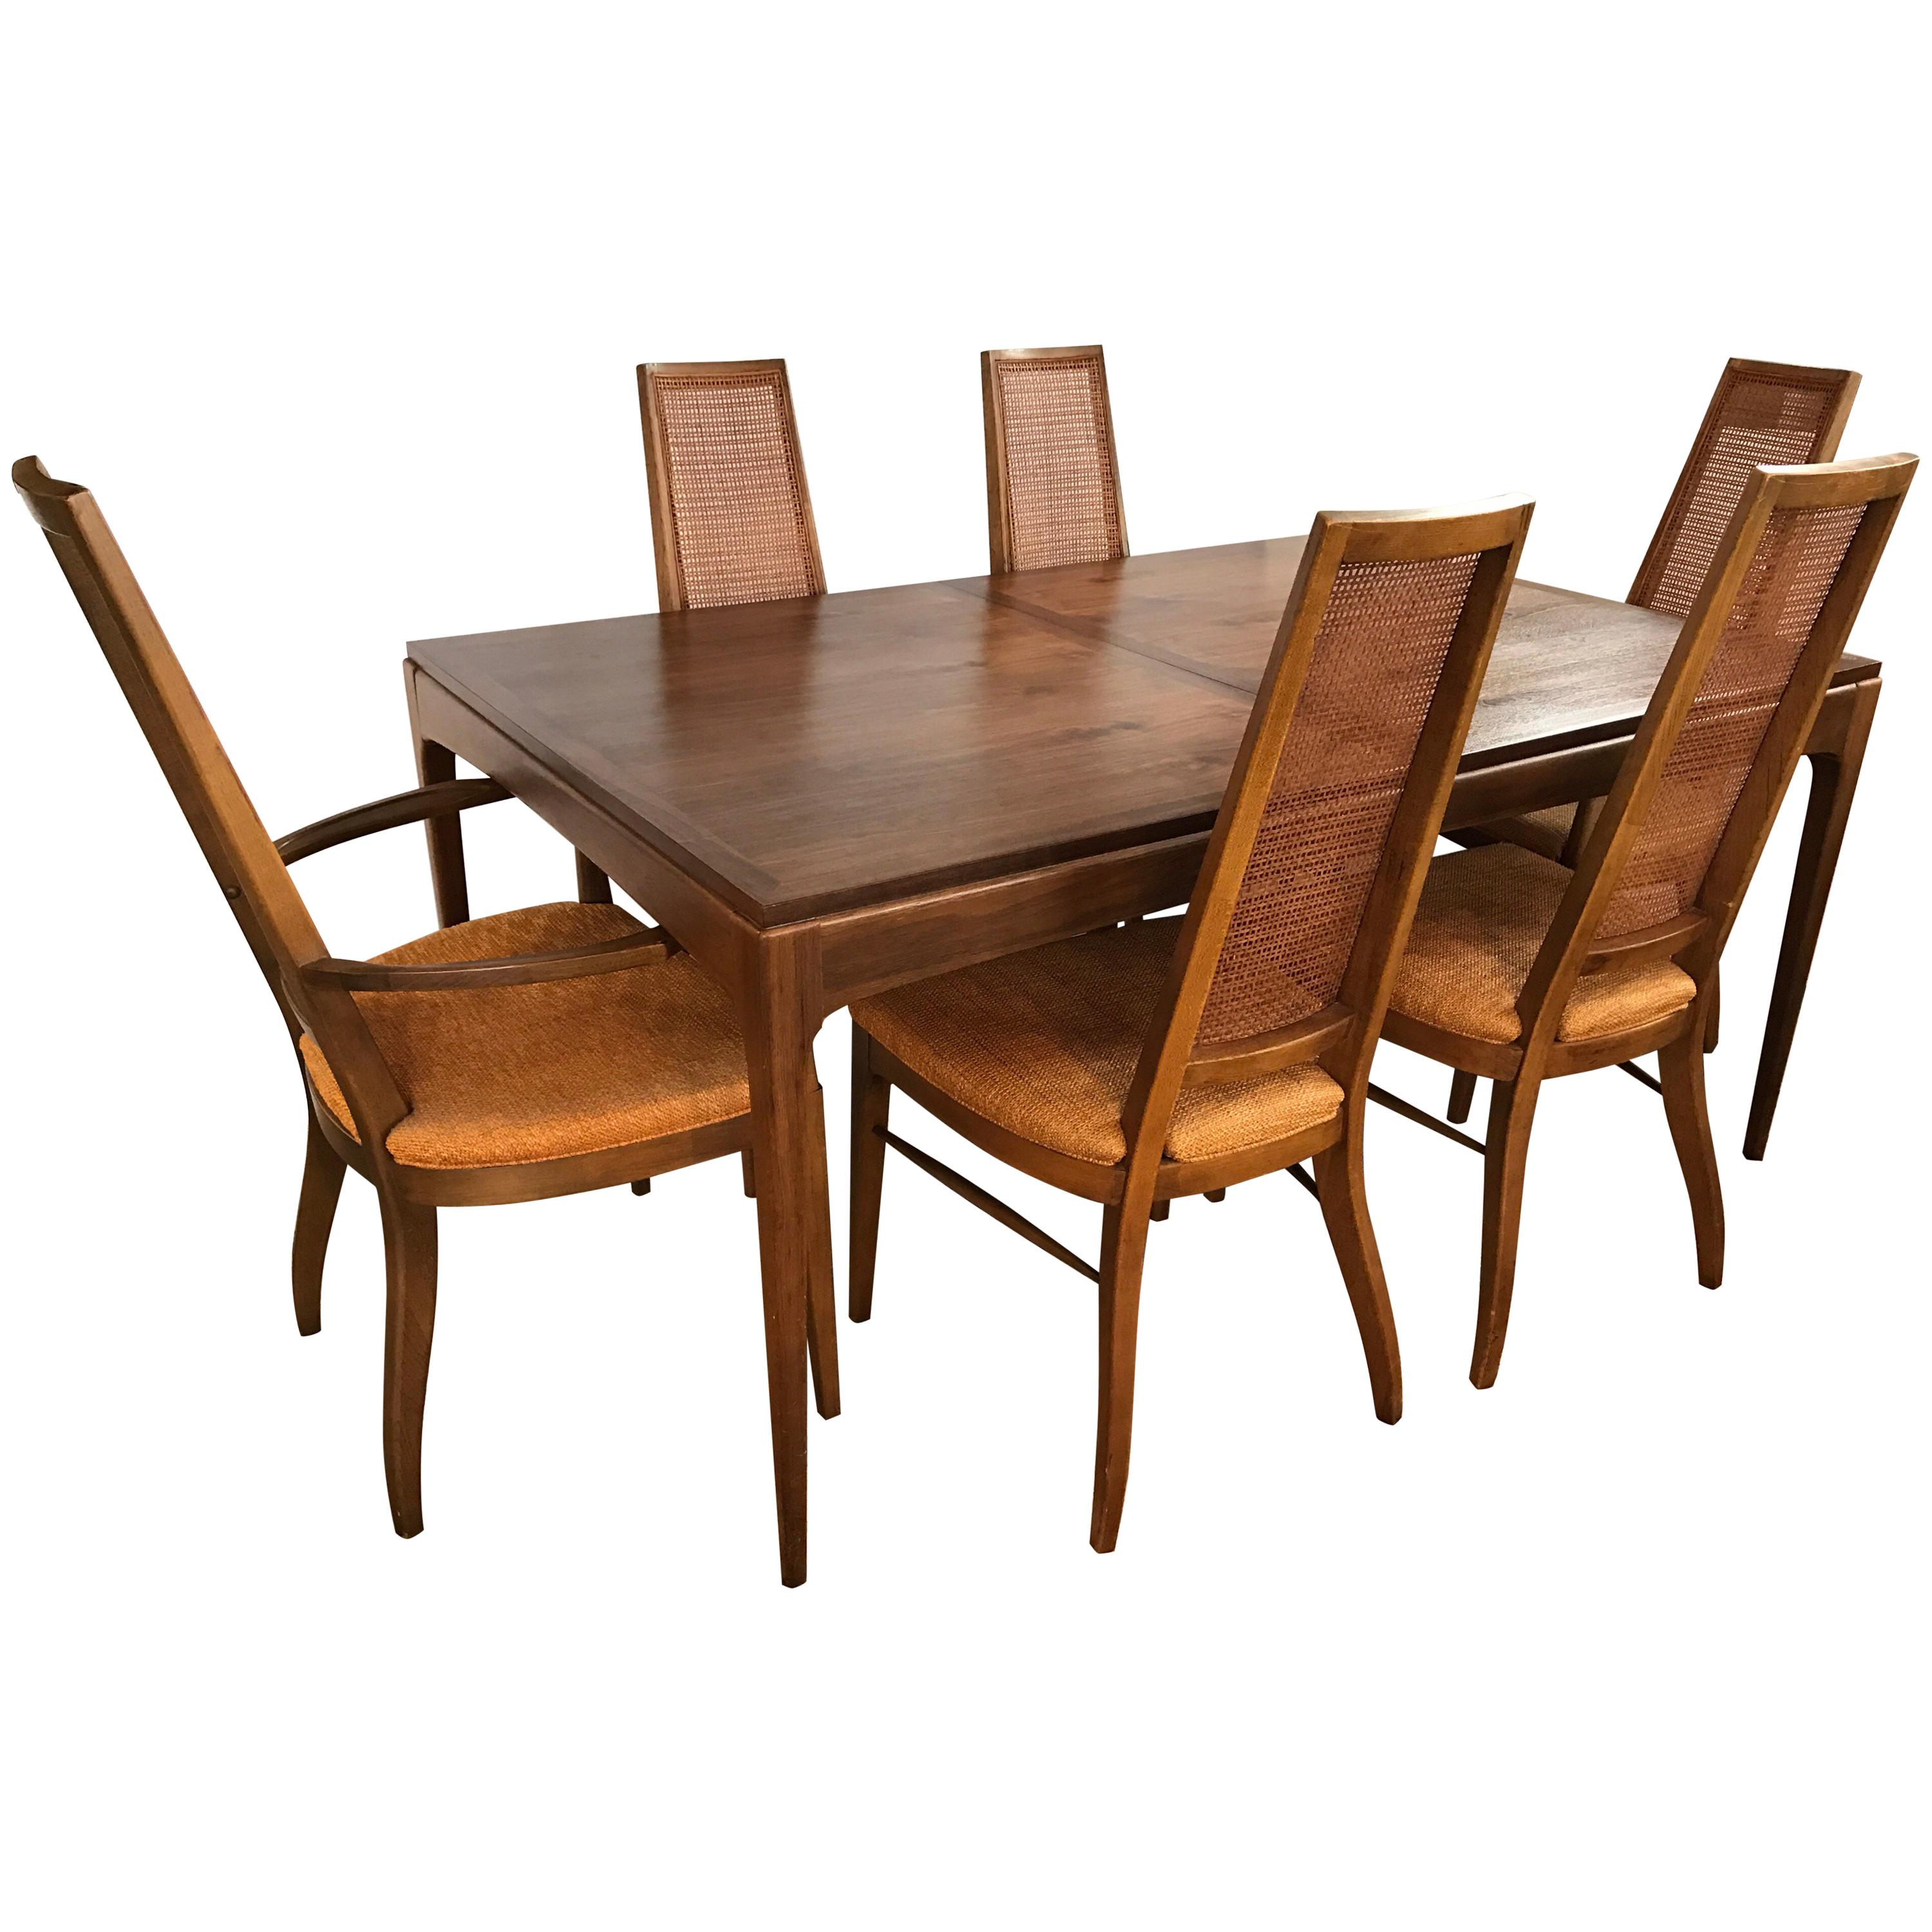 Lane Dining Room Table And Chairs For, Lane Furniture Dining Room Set